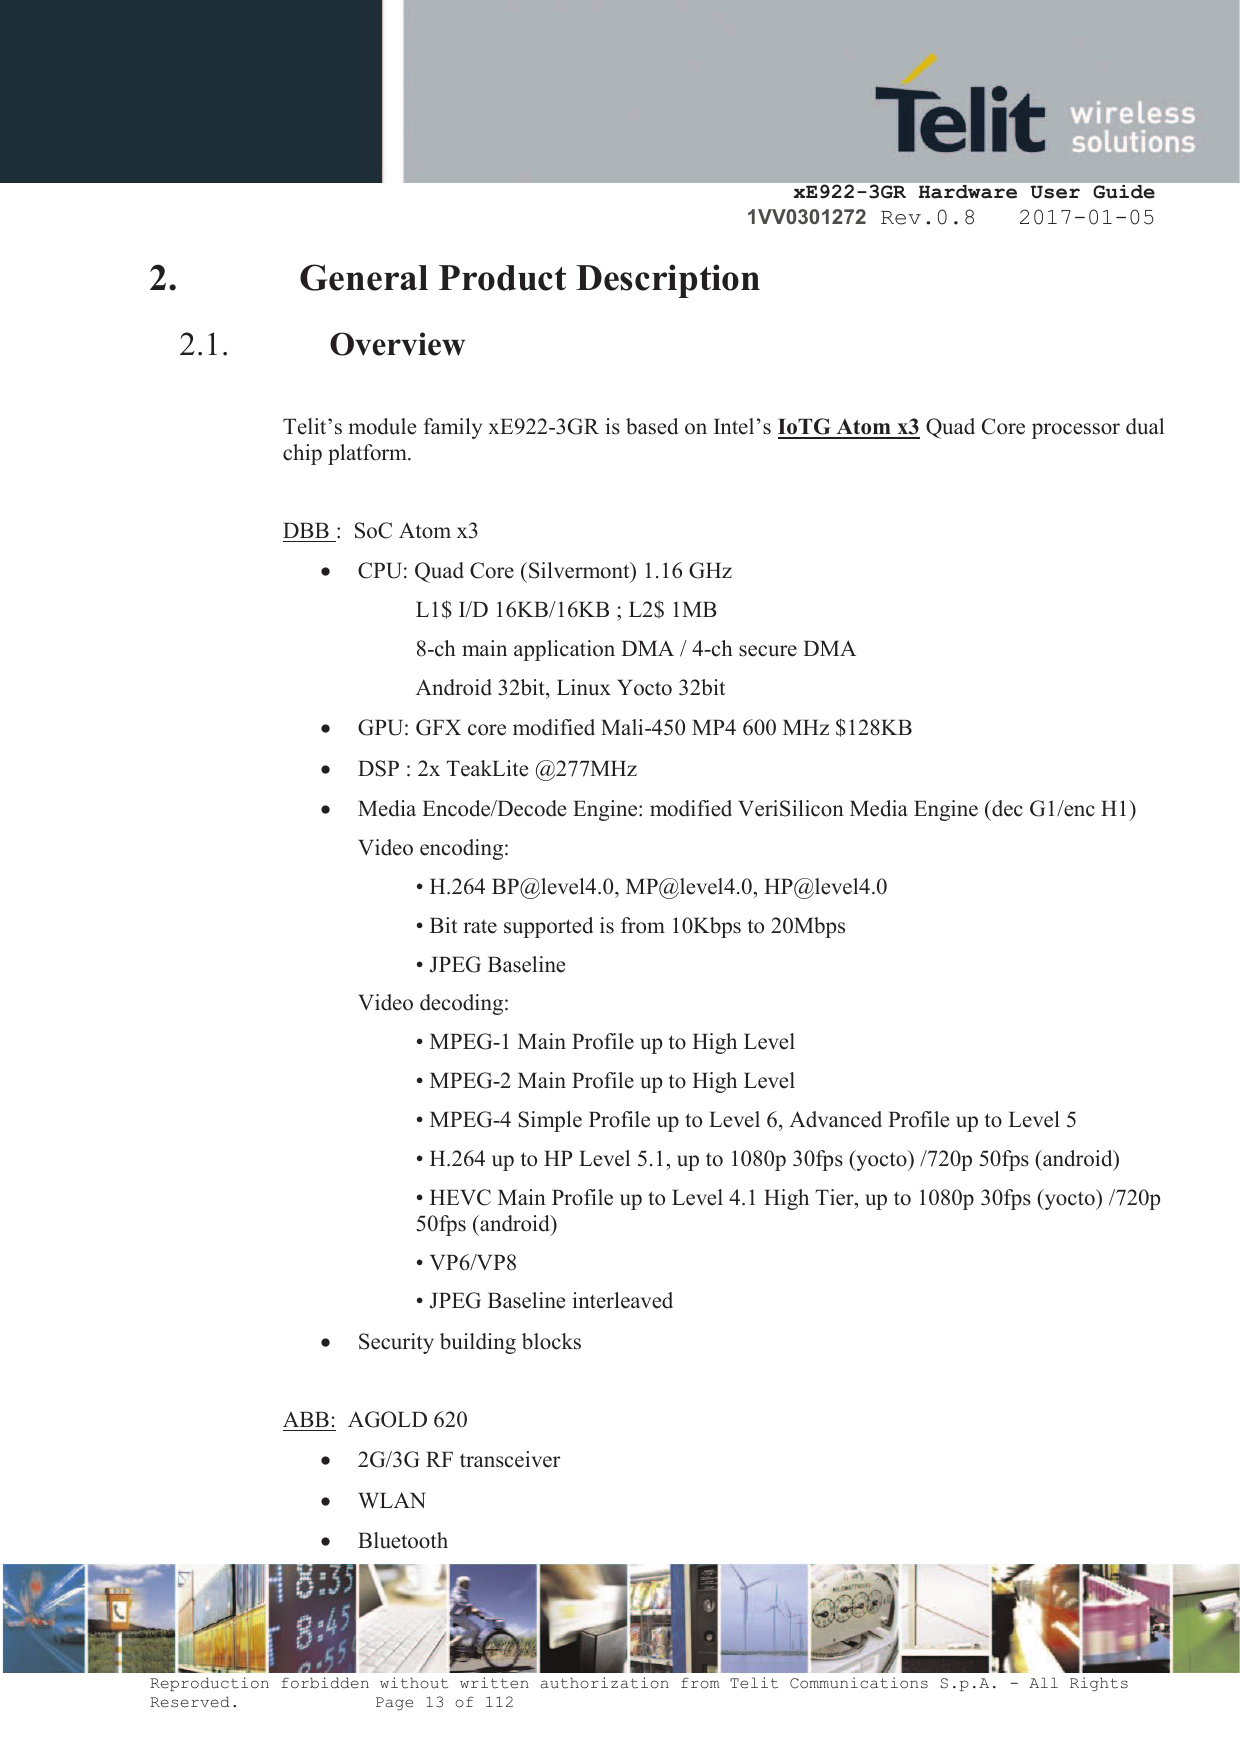     xE922-3GR Hardware User Guide 1VV0301272 Rev.0.8   2017-01-05 Reproduction forbidden without written authorization from Telit Communications S.p.A. - All Rights Reserved.    Page 13 of 112  2. General Product Description 2.1. Overview  Telit’s module family xE922-3GR is based on Intel’s IoTG Atom x3 Quad Core processor dual chip platform.  DBB :  SoC Atom x3 · CPU: Quad Core (Silvermont) 1.16 GHz L1$ I/D 16KB/16KB ; L2$ 1MB 8-ch main application DMA / 4-ch secure DMA Android 32bit, Linux Yocto 32bit · GPU: GFX core modified Mali-450 MP4 600 MHz $128KB · DSP : 2x TeakLite @277MHz · Media Encode/Decode Engine: modified VeriSilicon Media Engine (dec G1/enc H1) Video encoding: • H.264 BP@level4.0, MP@level4.0, HP@level4.0 • Bit rate supported is from 10Kbps to 20Mbps • JPEG Baseline Video decoding: • MPEG-1 Main Profile up to High Level • MPEG-2 Main Profile up to High Level • MPEG-4 Simple Profile up to Level 6, Advanced Profile up to Level 5 • H.264 up to HP Level 5.1, up to 1080p 30fps (yocto) /720p 50fps (android) • HEVC Main Profile up to Level 4.1 High Tier, up to 1080p 30fps (yocto) /720p 50fps (android) • VP6/VP8 • JPEG Baseline interleaved · Security building blocks  ABB:  AGOLD 620  · 2G/3G RF transceiver · WLAN · Bluetooth 